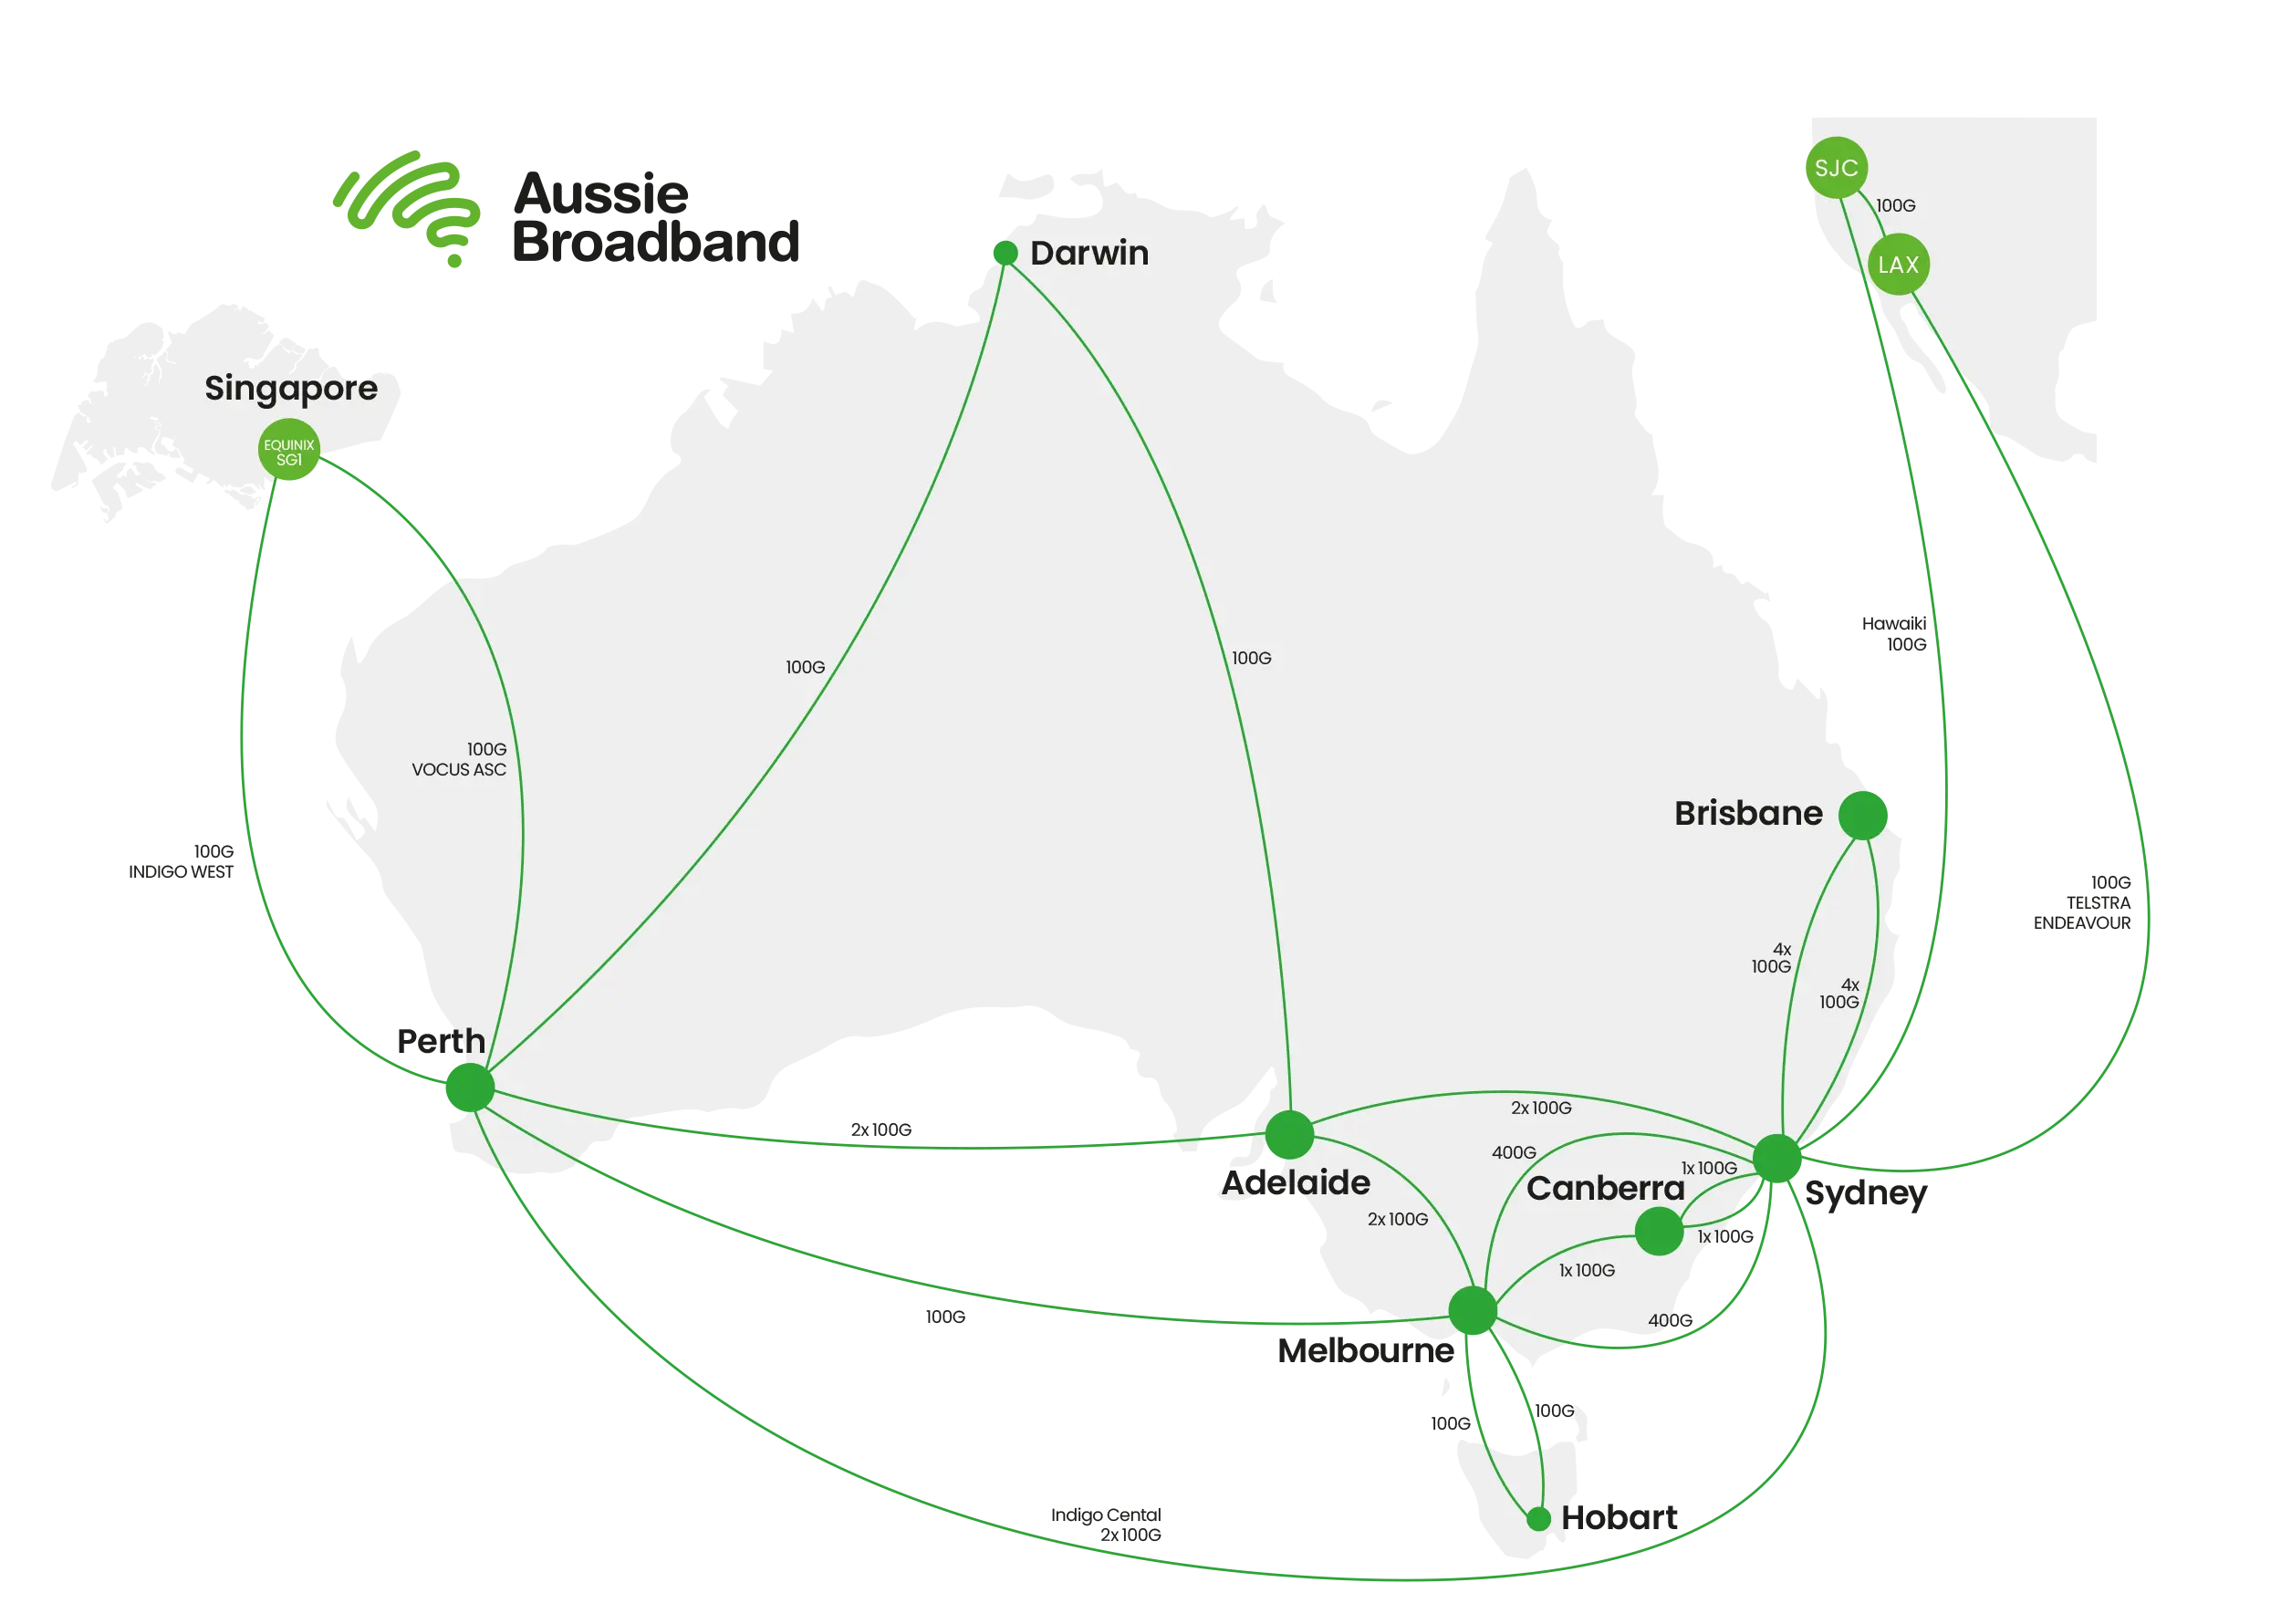 A diagram showing the map of Aussie Broadband's network